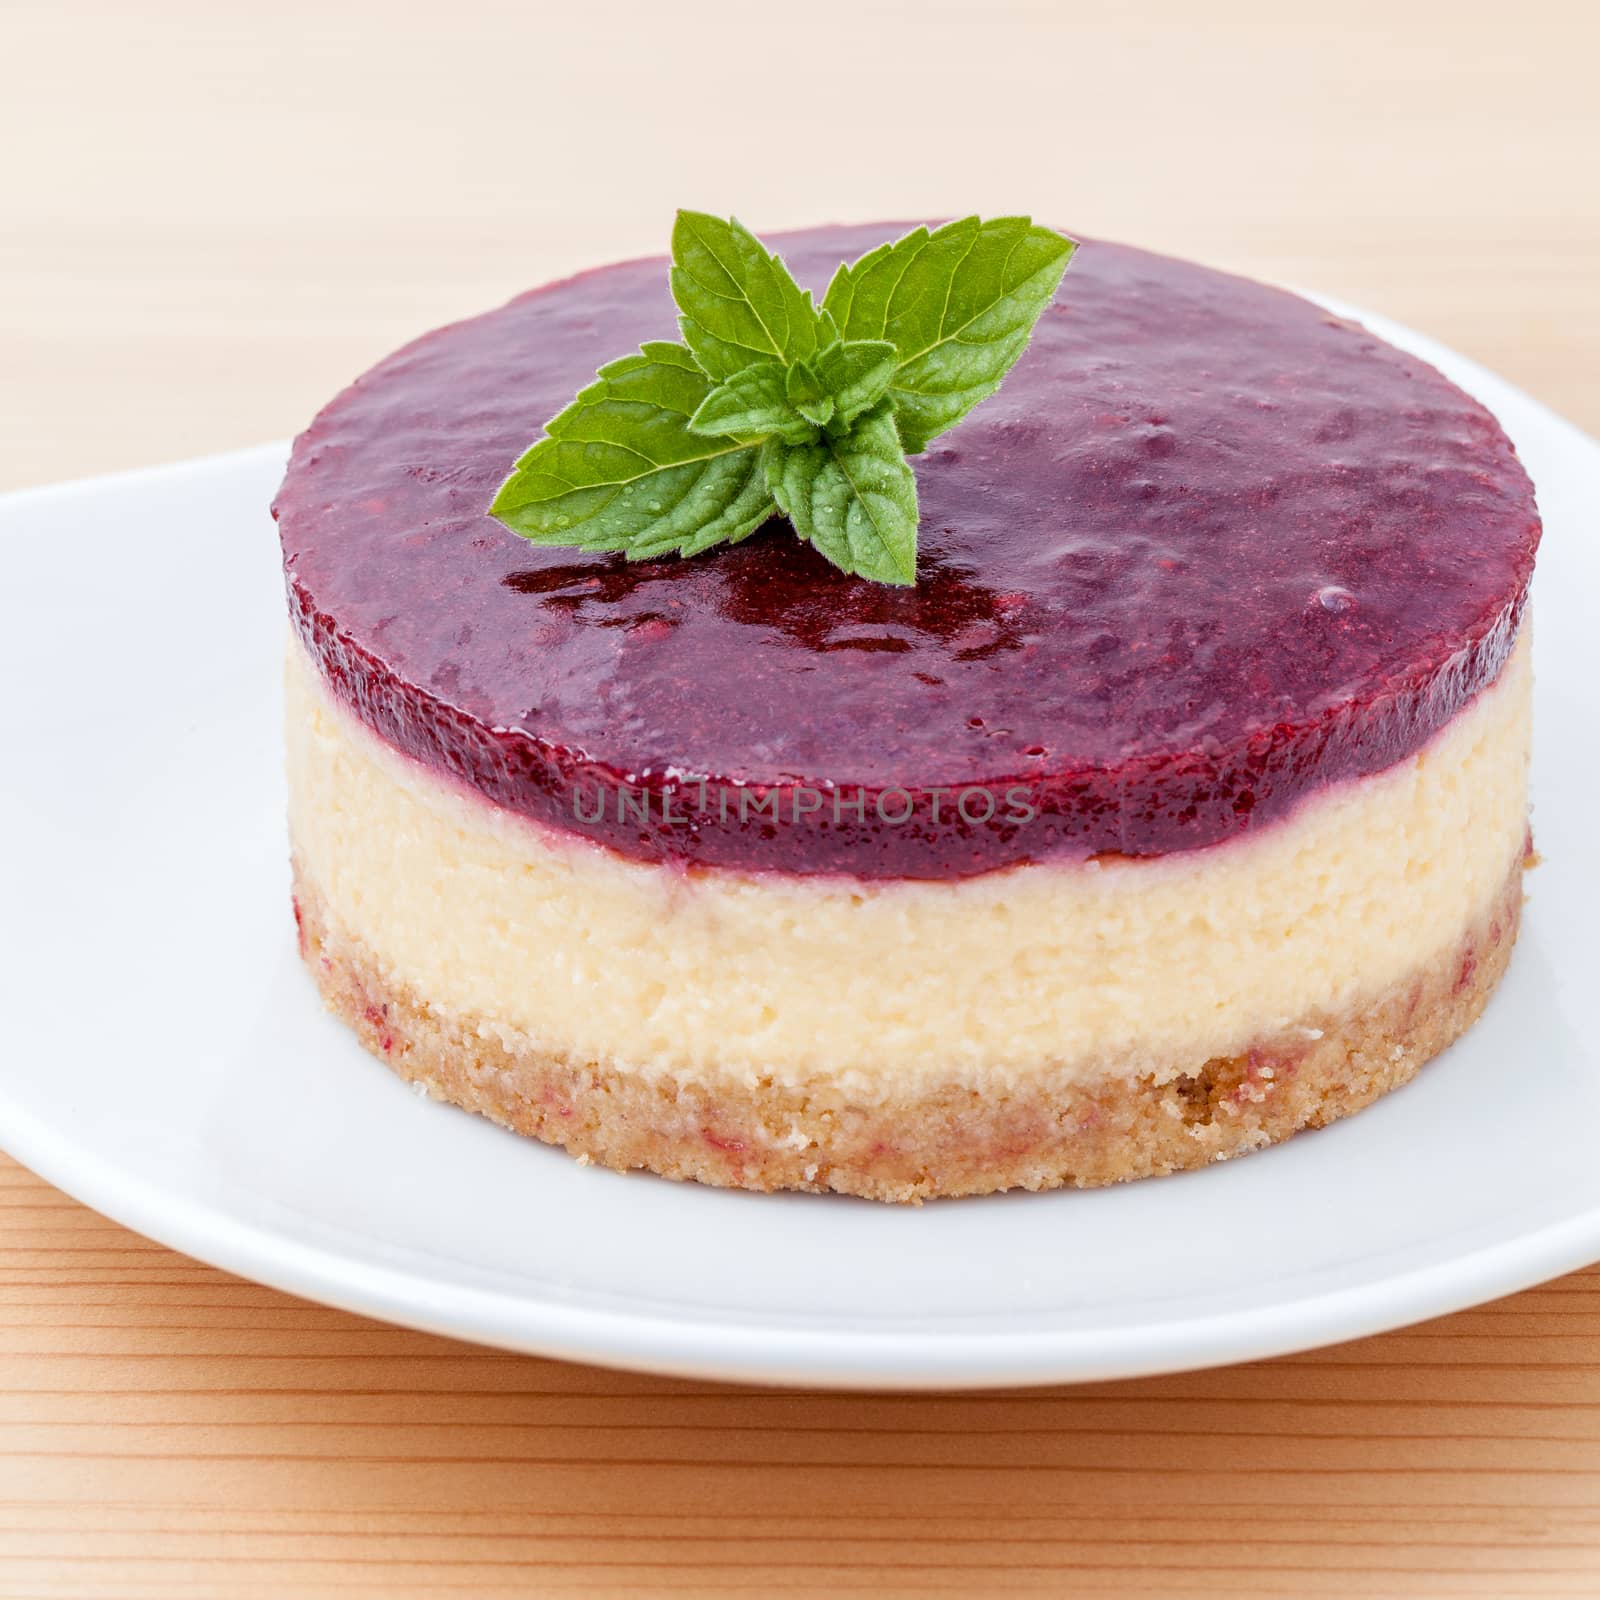 Blueberry cheesecake with fresh mint leaves on wooden background. Selective focus depth of field.